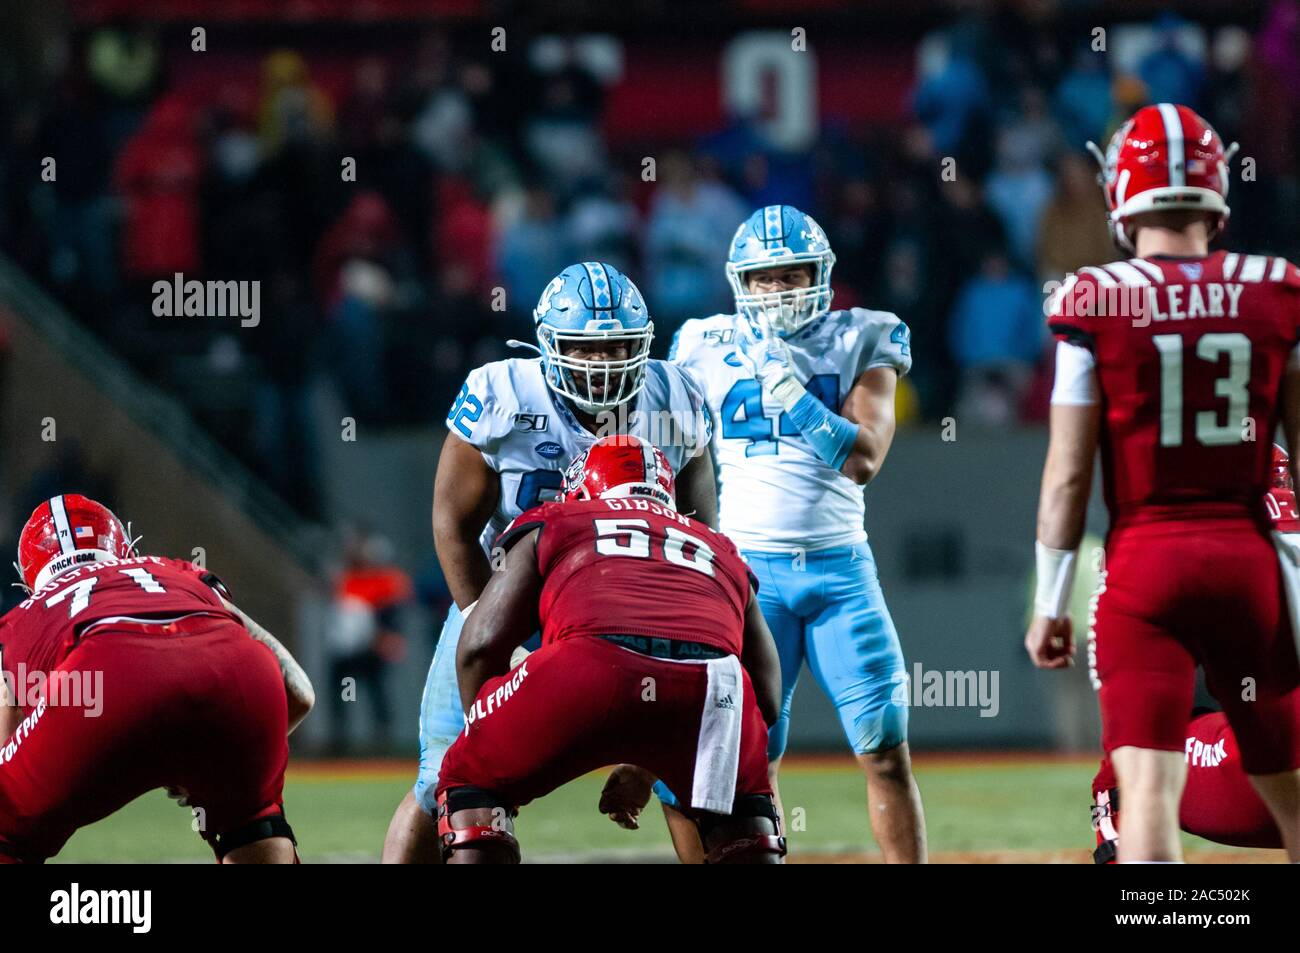 Raleigh, North Carolina, USA. 30th Nov, 2019. Nov. 30, 2019 - Raleigh, North Carolina, USA - North Carolina Tar Heels defensive lineman Jahlil Taylor (52) and linebacker Jeremiah Gemmel (44) eye offense during Saturday's game between the NC State Wolfpack and University of North Carolina Tar Heels. The Tar Heels defeated the Wolfpack, 41-10. Credit: Timothy L. Hale/ZUMA Wire/Alamy Live News Stock Photo